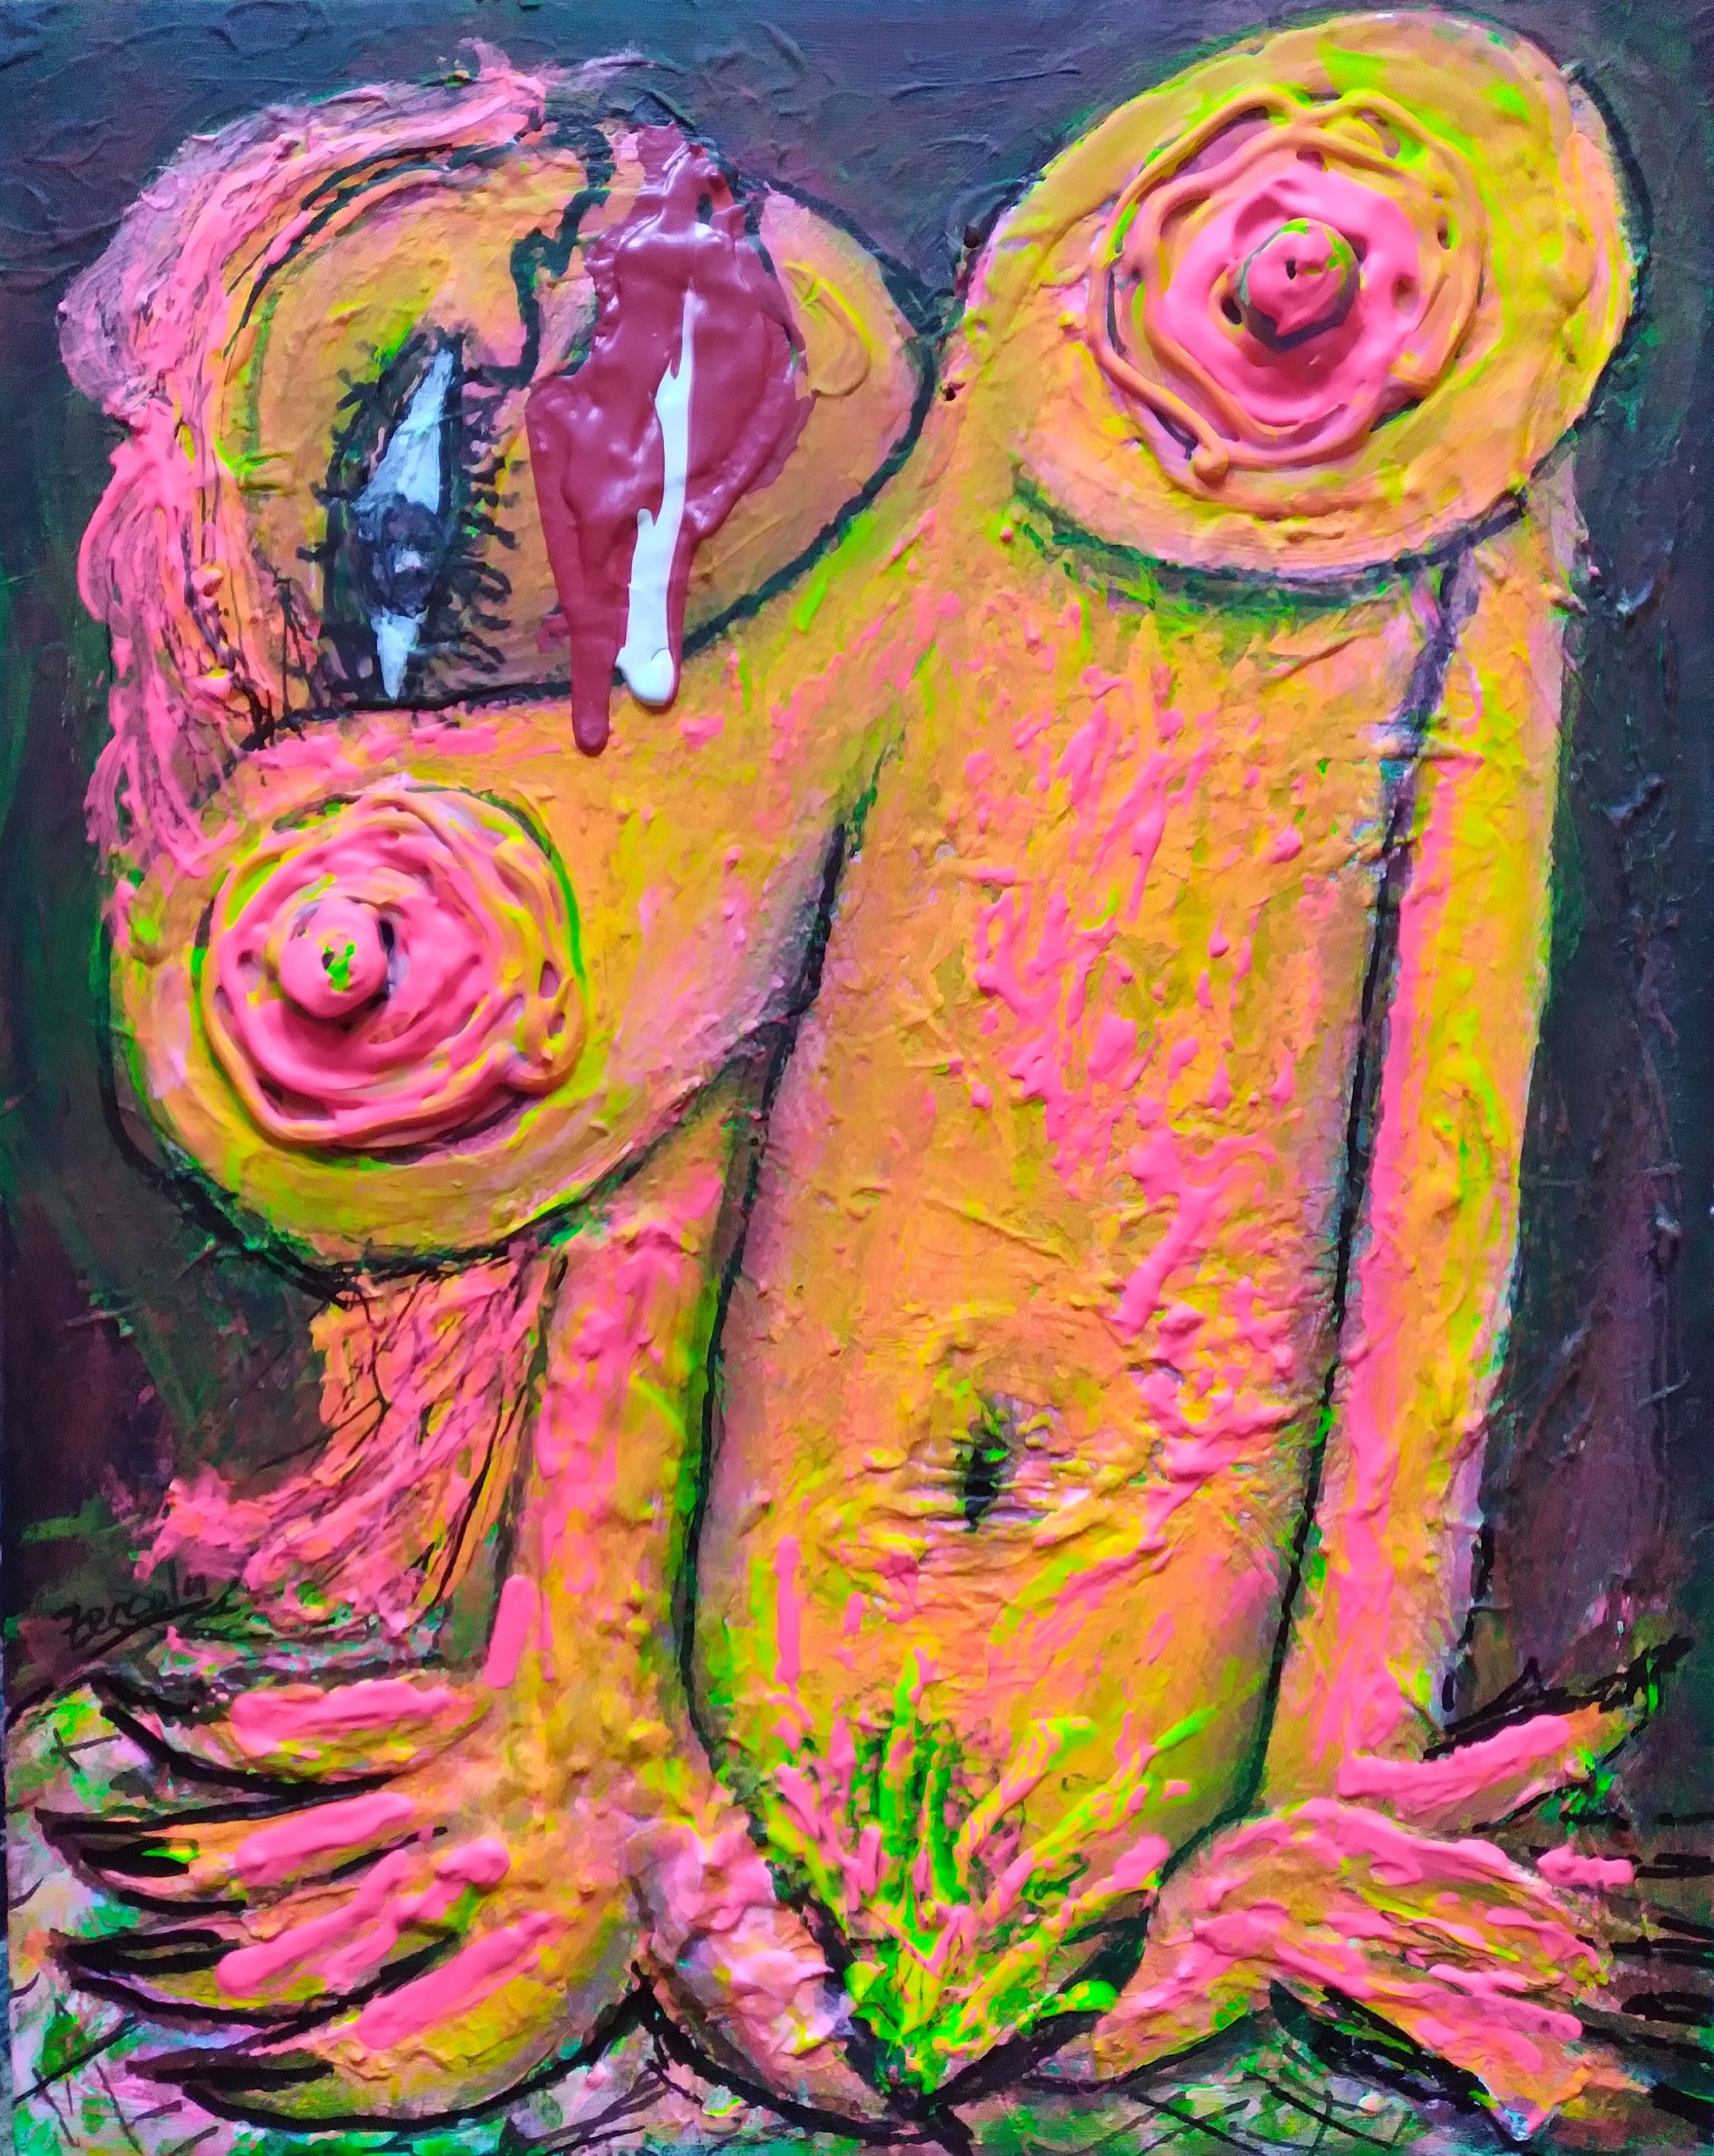 The Pink Panther, 2021. Oil, acrylic, glass beads on canvas. 20" x 16”.